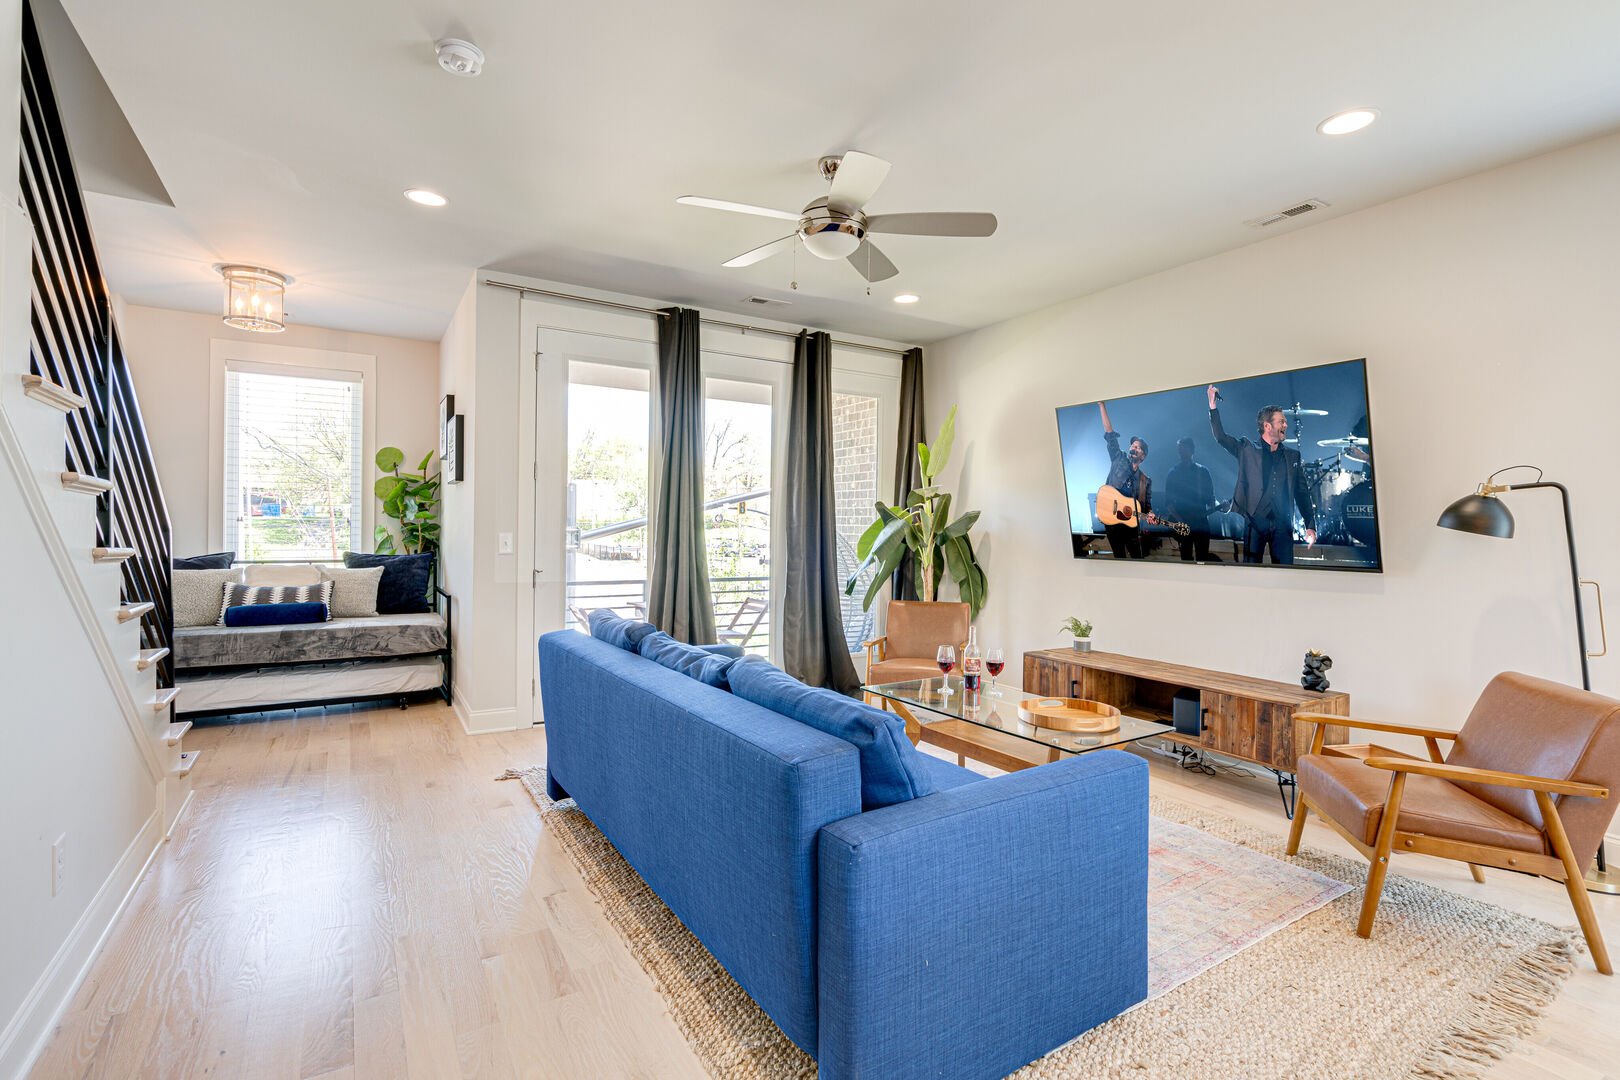 Bright and open living space with designer furnishings and smart TV.